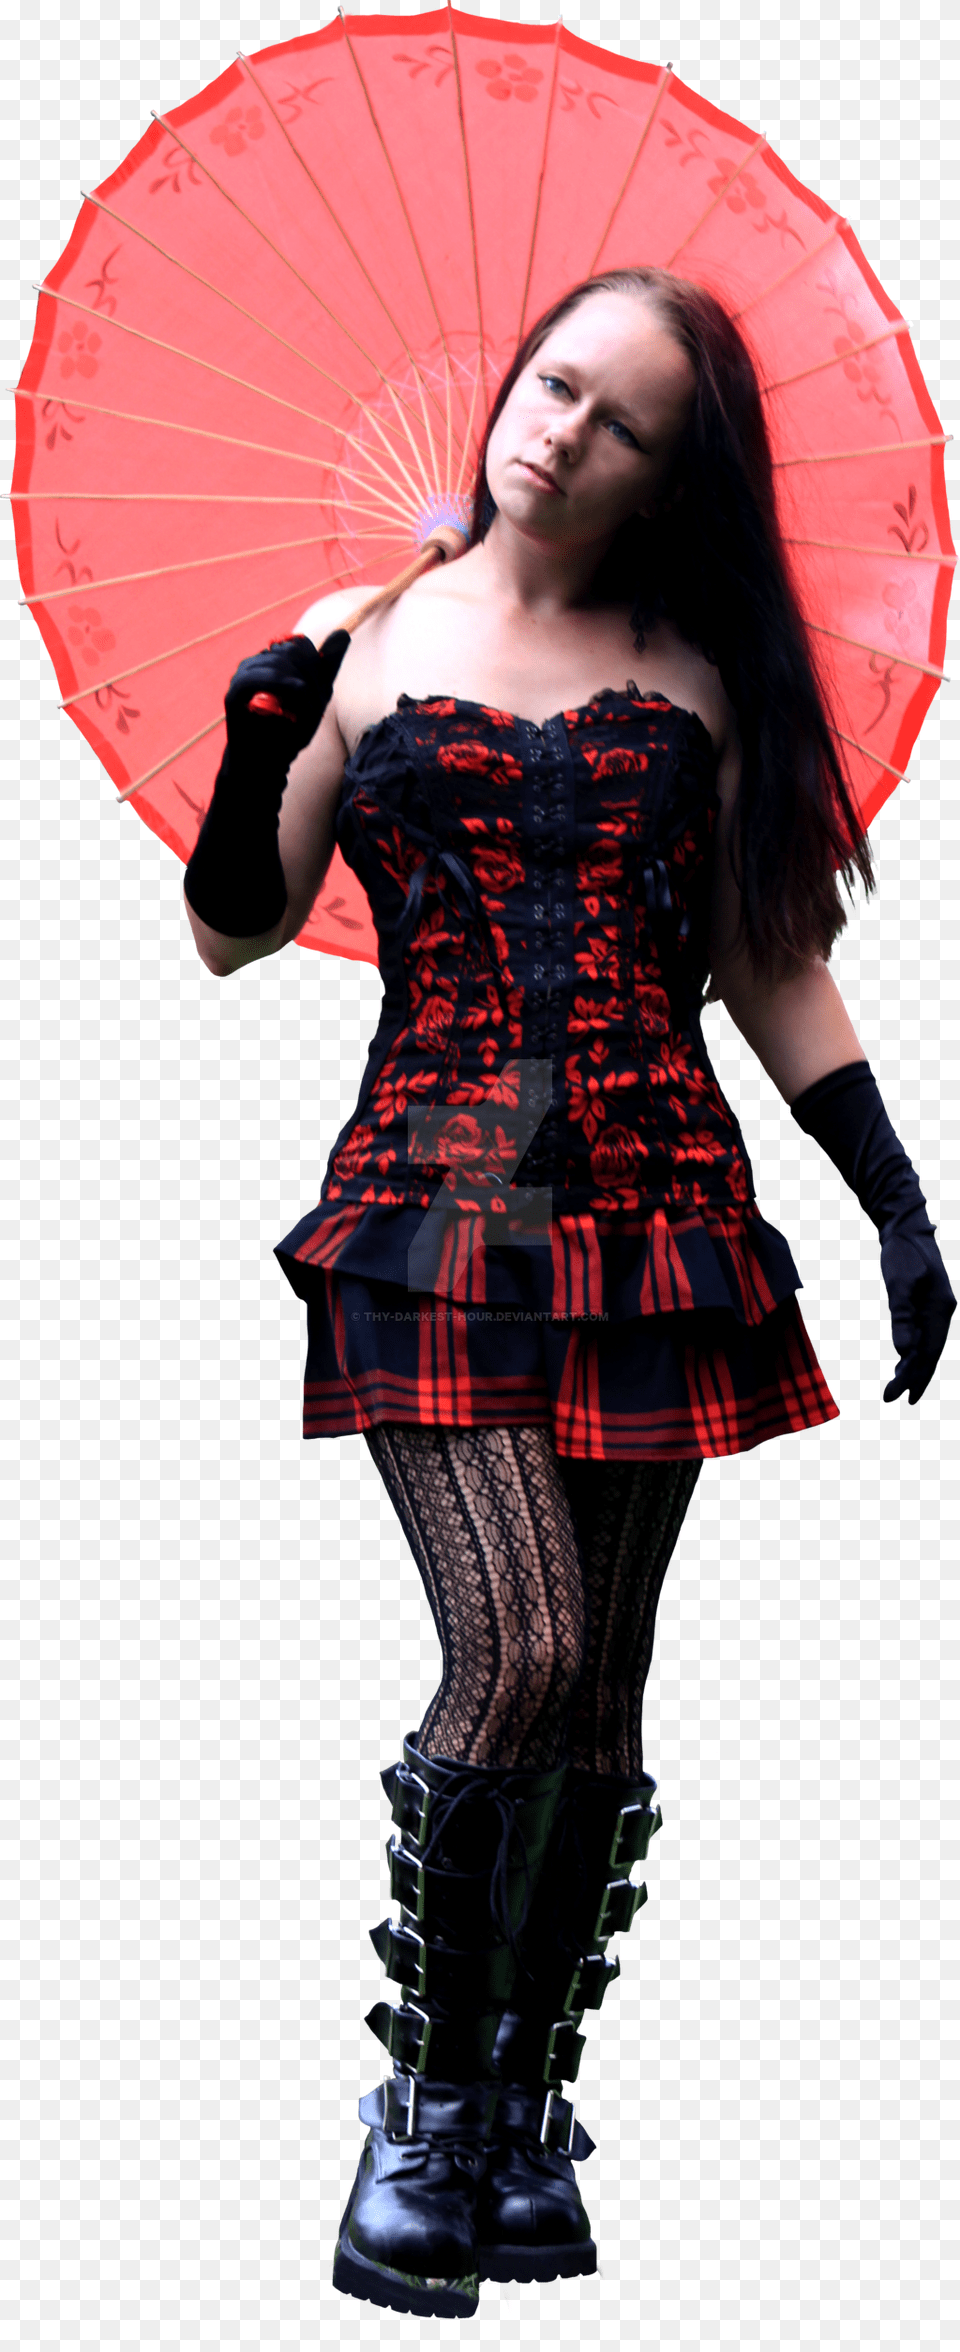 Gothic Images Transparent, Clothing, Person, Glove, Girl Png Image